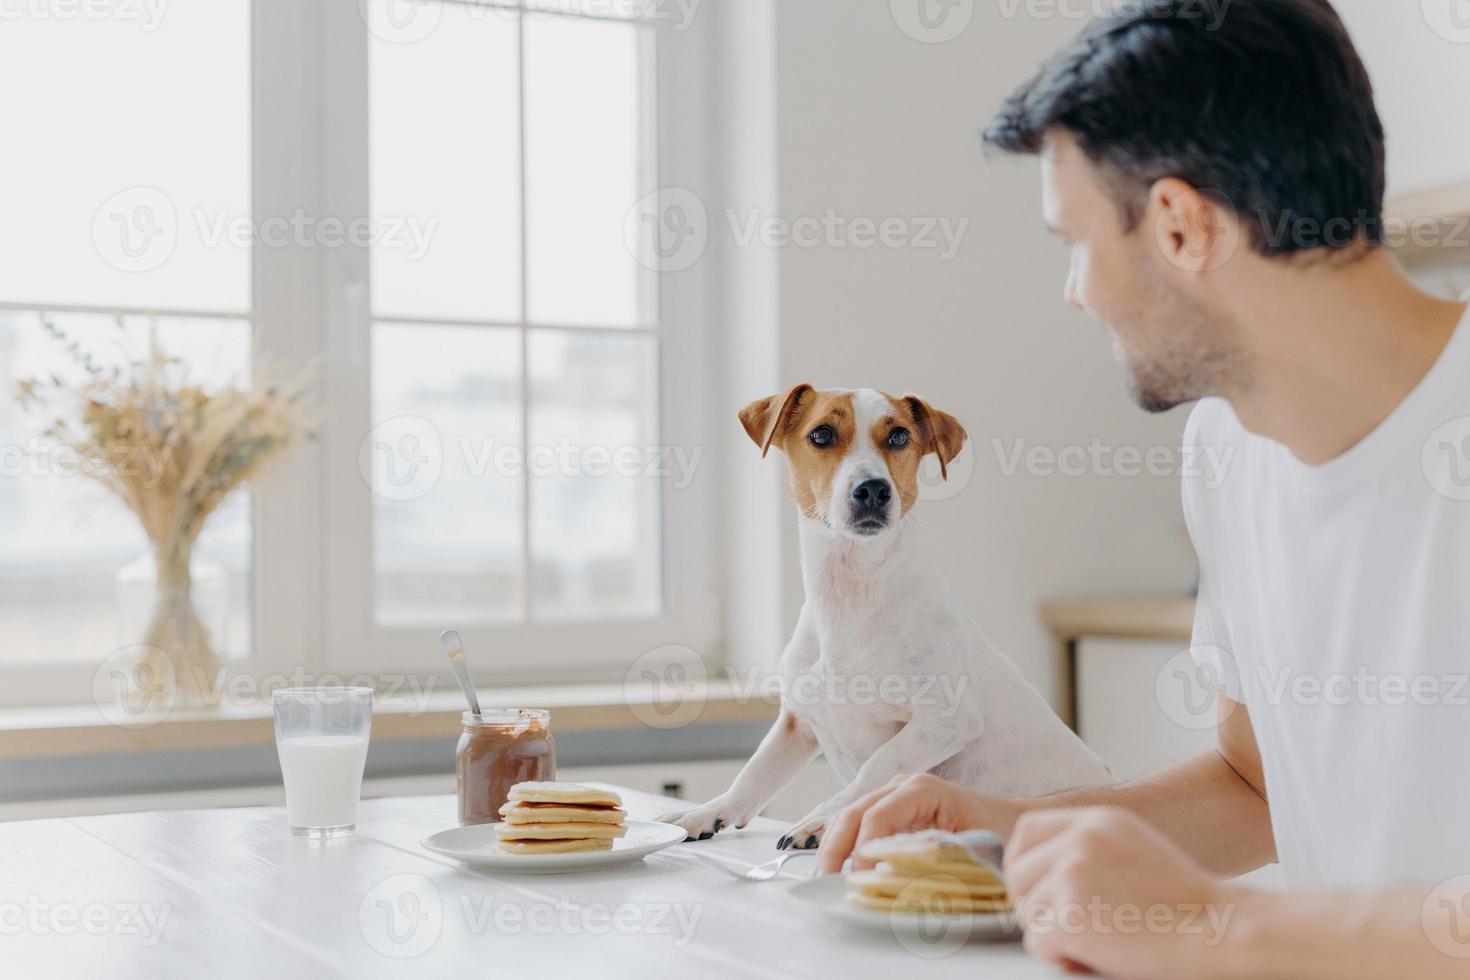 Young man turns away from camera, looks attentively at pedigree dog, have lunch together, eat tasty delicious pancakes at kitchen table, use forks, pose in spacious light room with big window photo